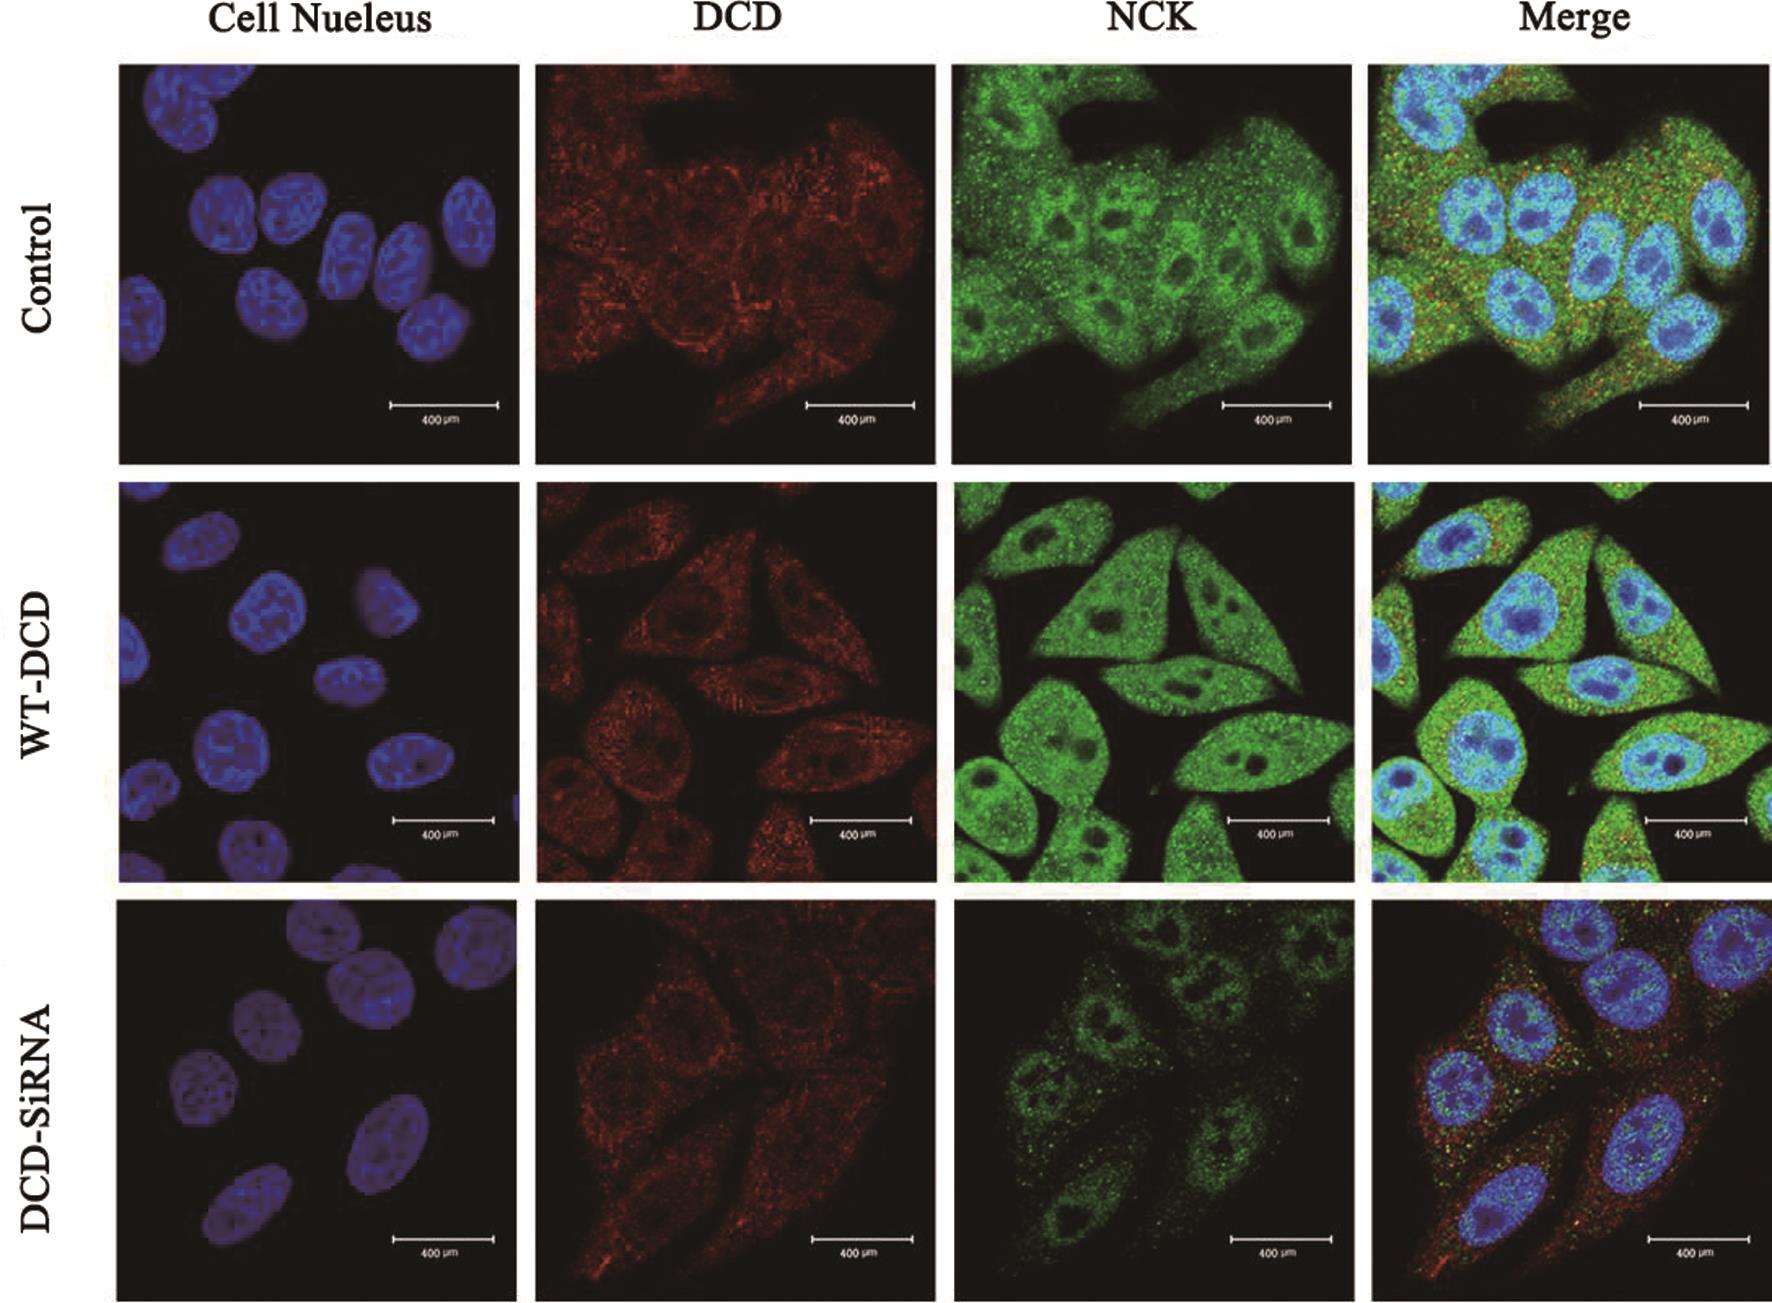 Colocalization of DCD and NCK proteins in SK-HEP-1 cells.